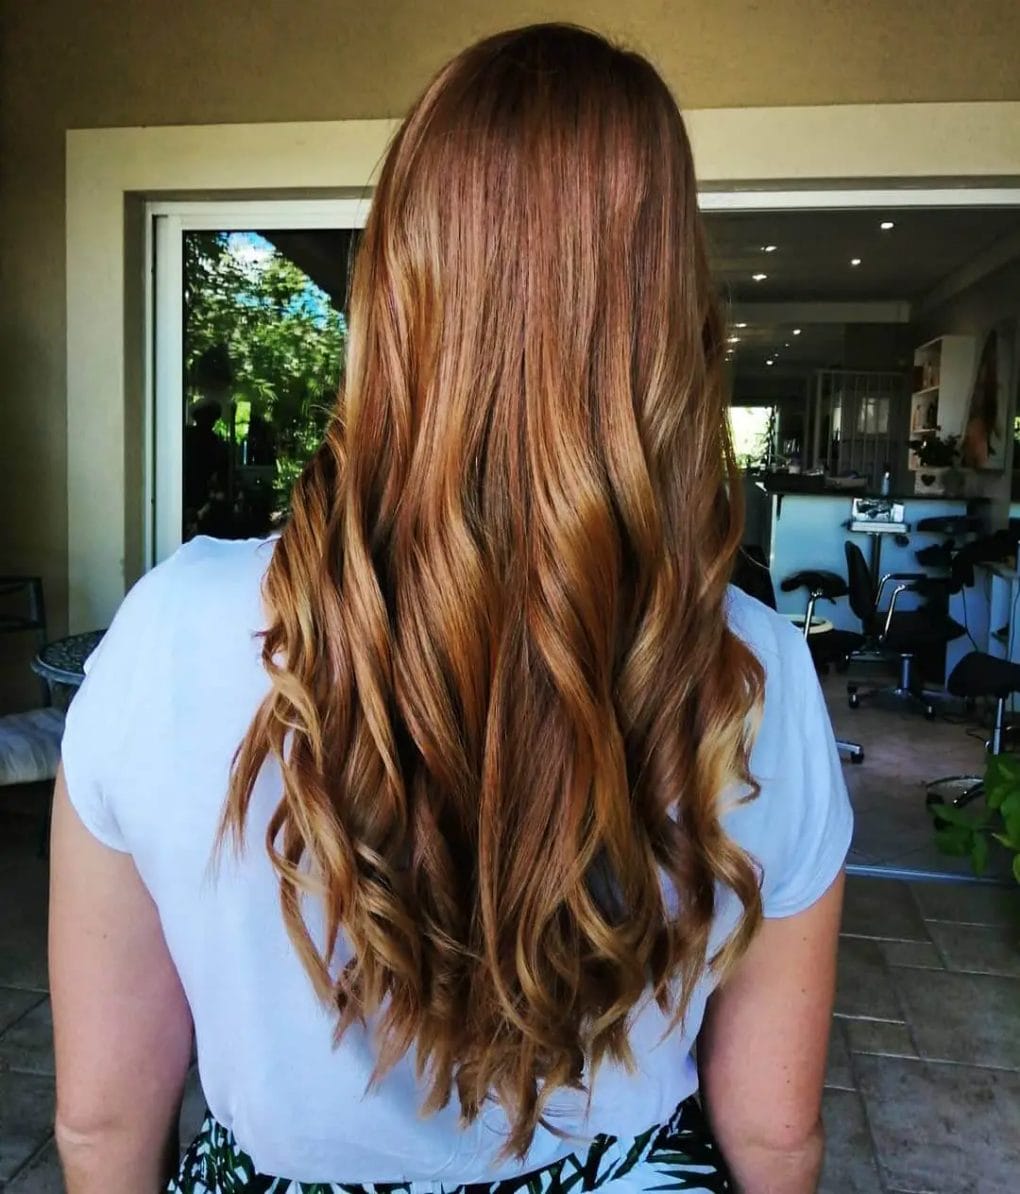 U-shaped waves transitioning from chestnut roots to vibrant coppery highlights.
